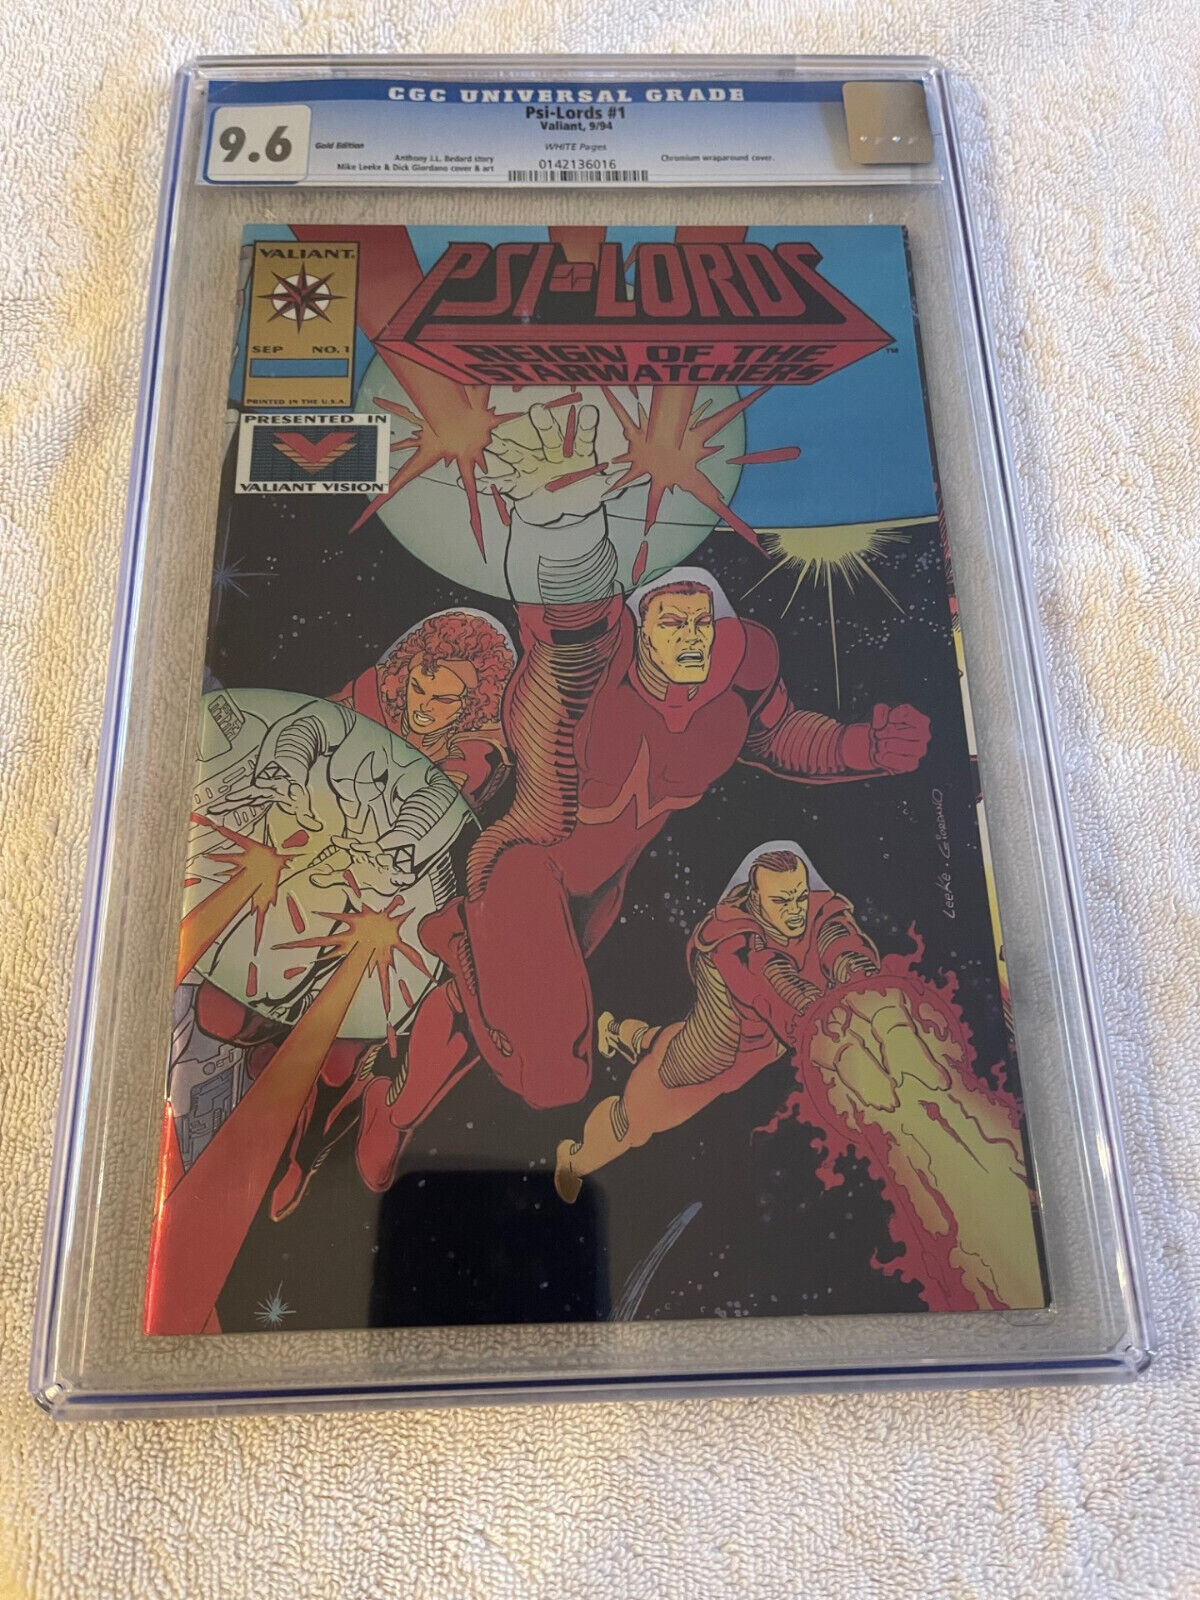 Psi-Lords #1 - Gold Edition - CGC 9.6 - White Pages - Valiant Comics 1994